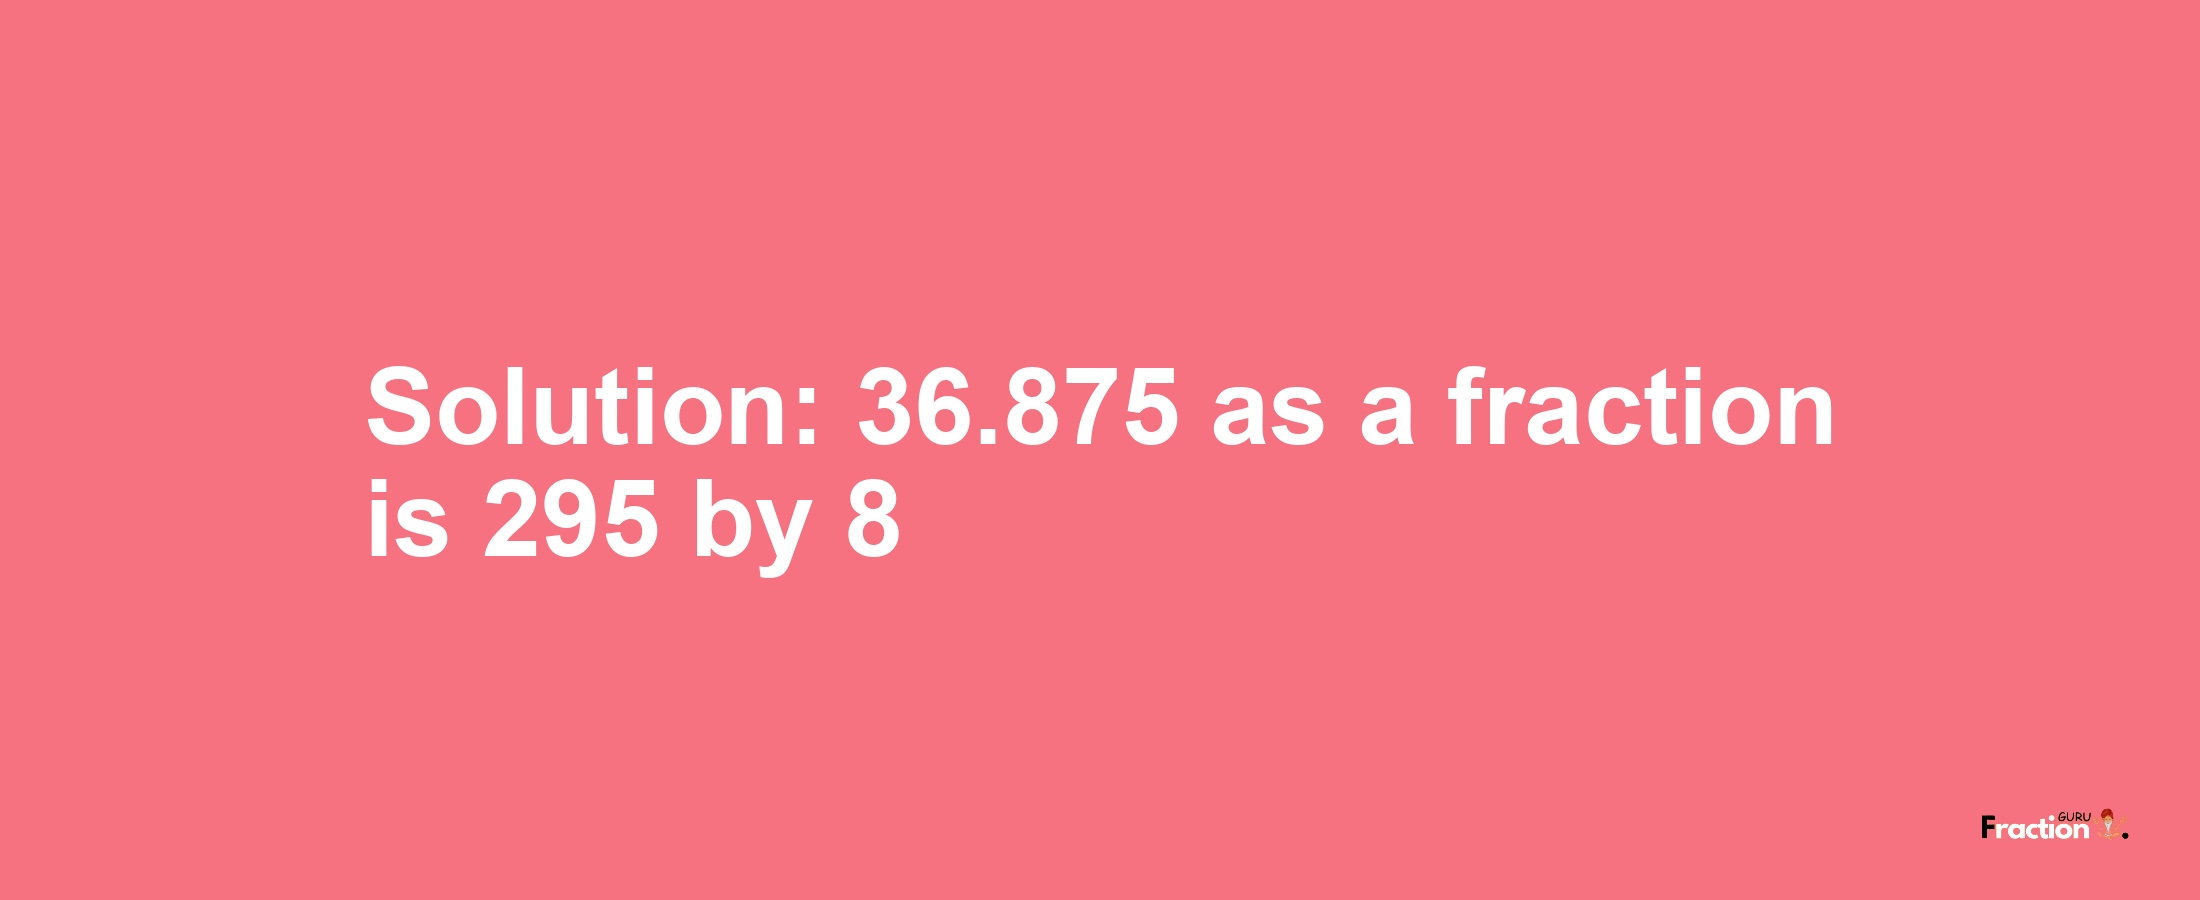 Solution:36.875 as a fraction is 295/8